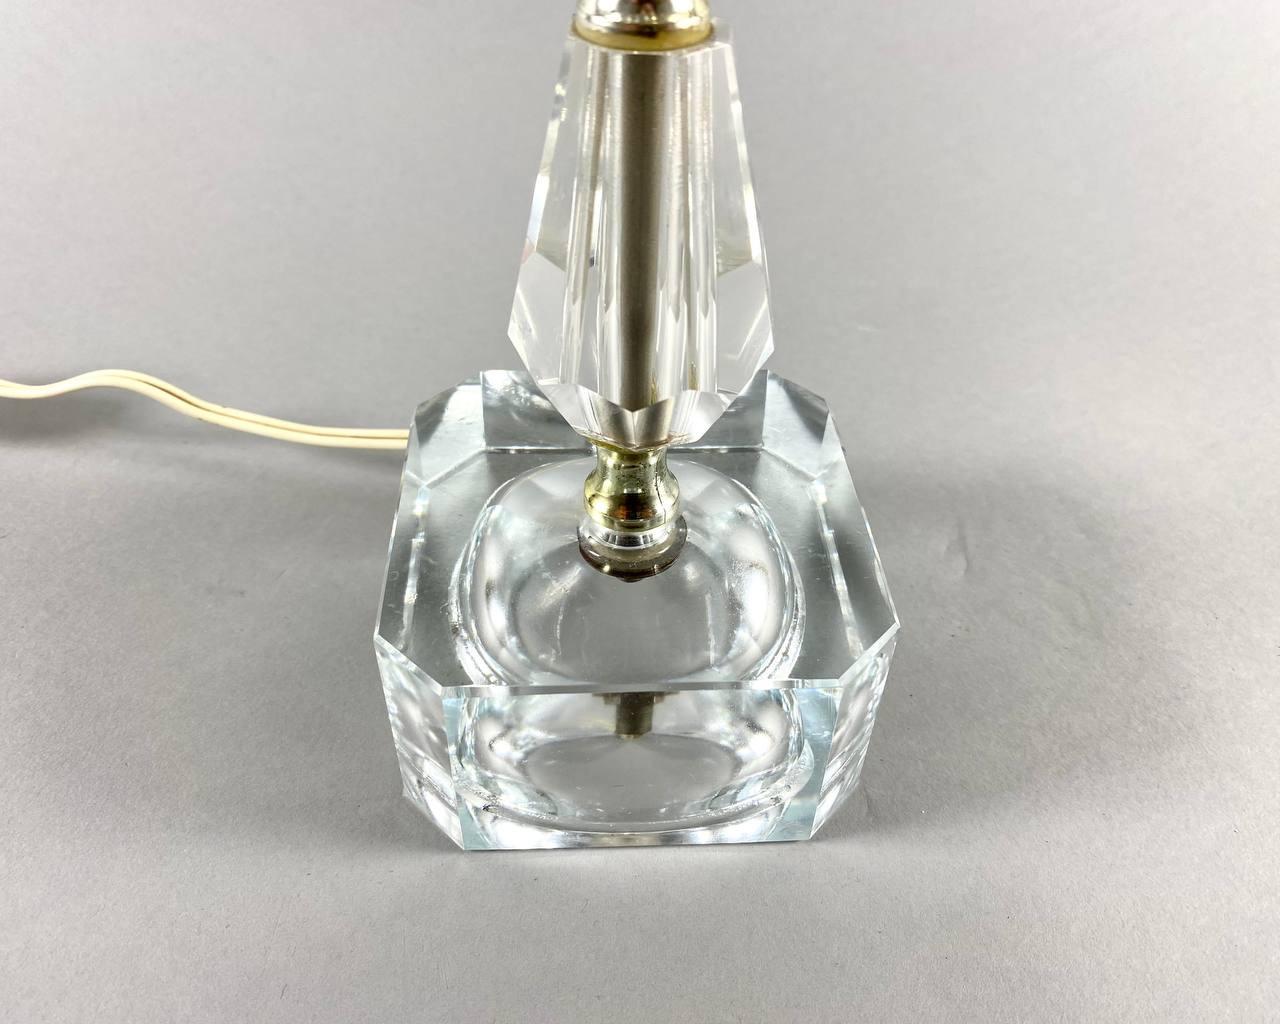 This vintage table lamp has a simple design with a minimal amount of decorative elements. 

Massive details made of transparent faceted glass are fixed on thin bronze-colored metal fittings. 

The lampshade is new, covered with a cream-colored